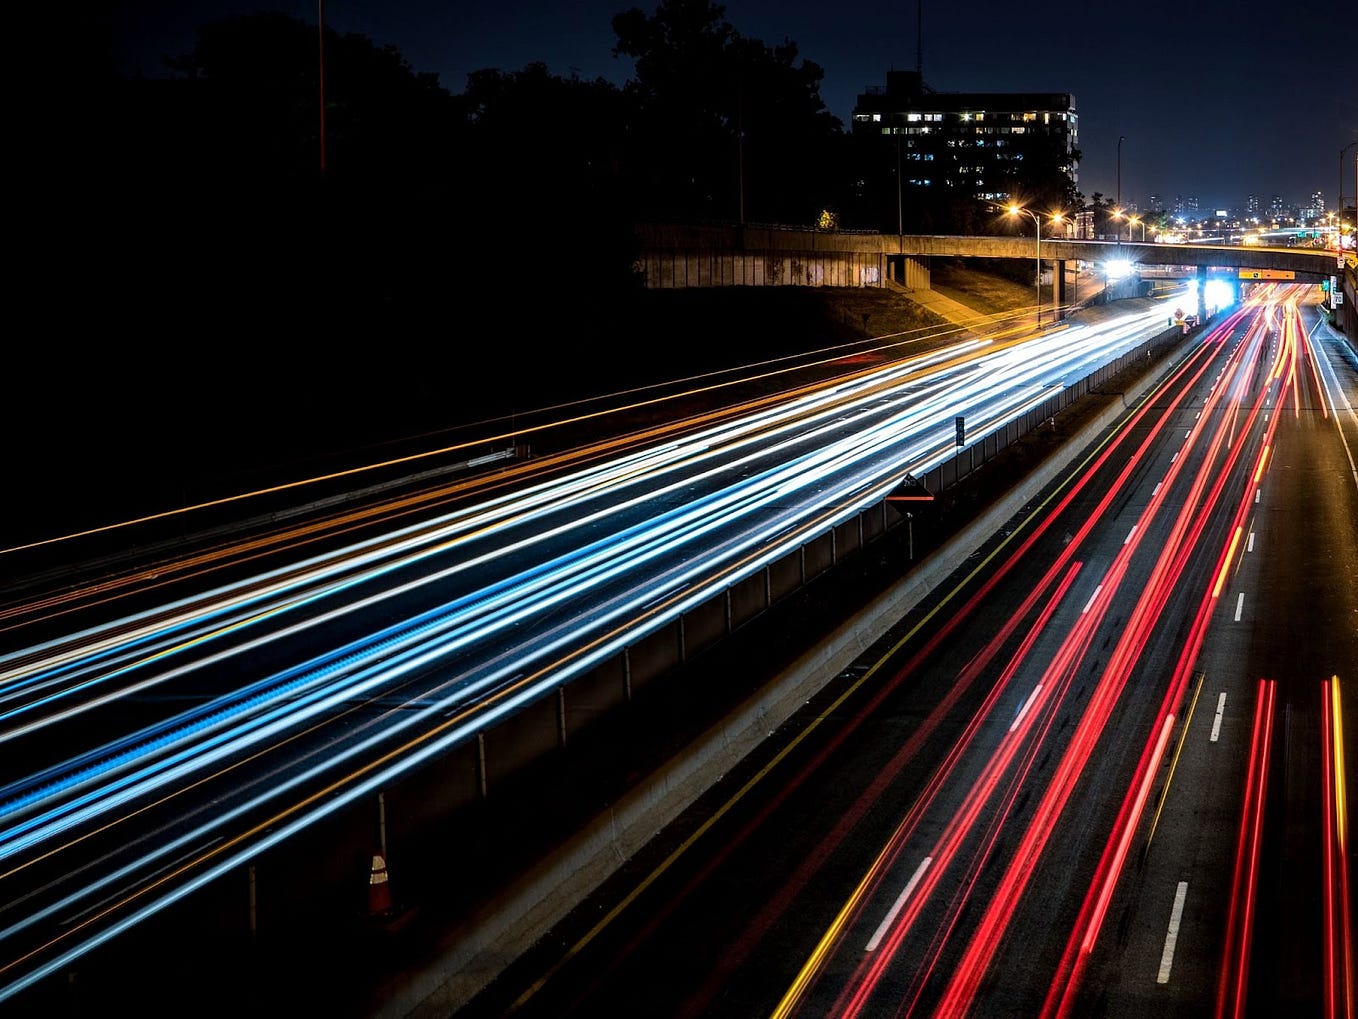 Long exposure picture of a highway, where the lights from the vehicles are really long continuous lines covering the road (and vehicles are actually not visible), giving a sense of really high speeds.